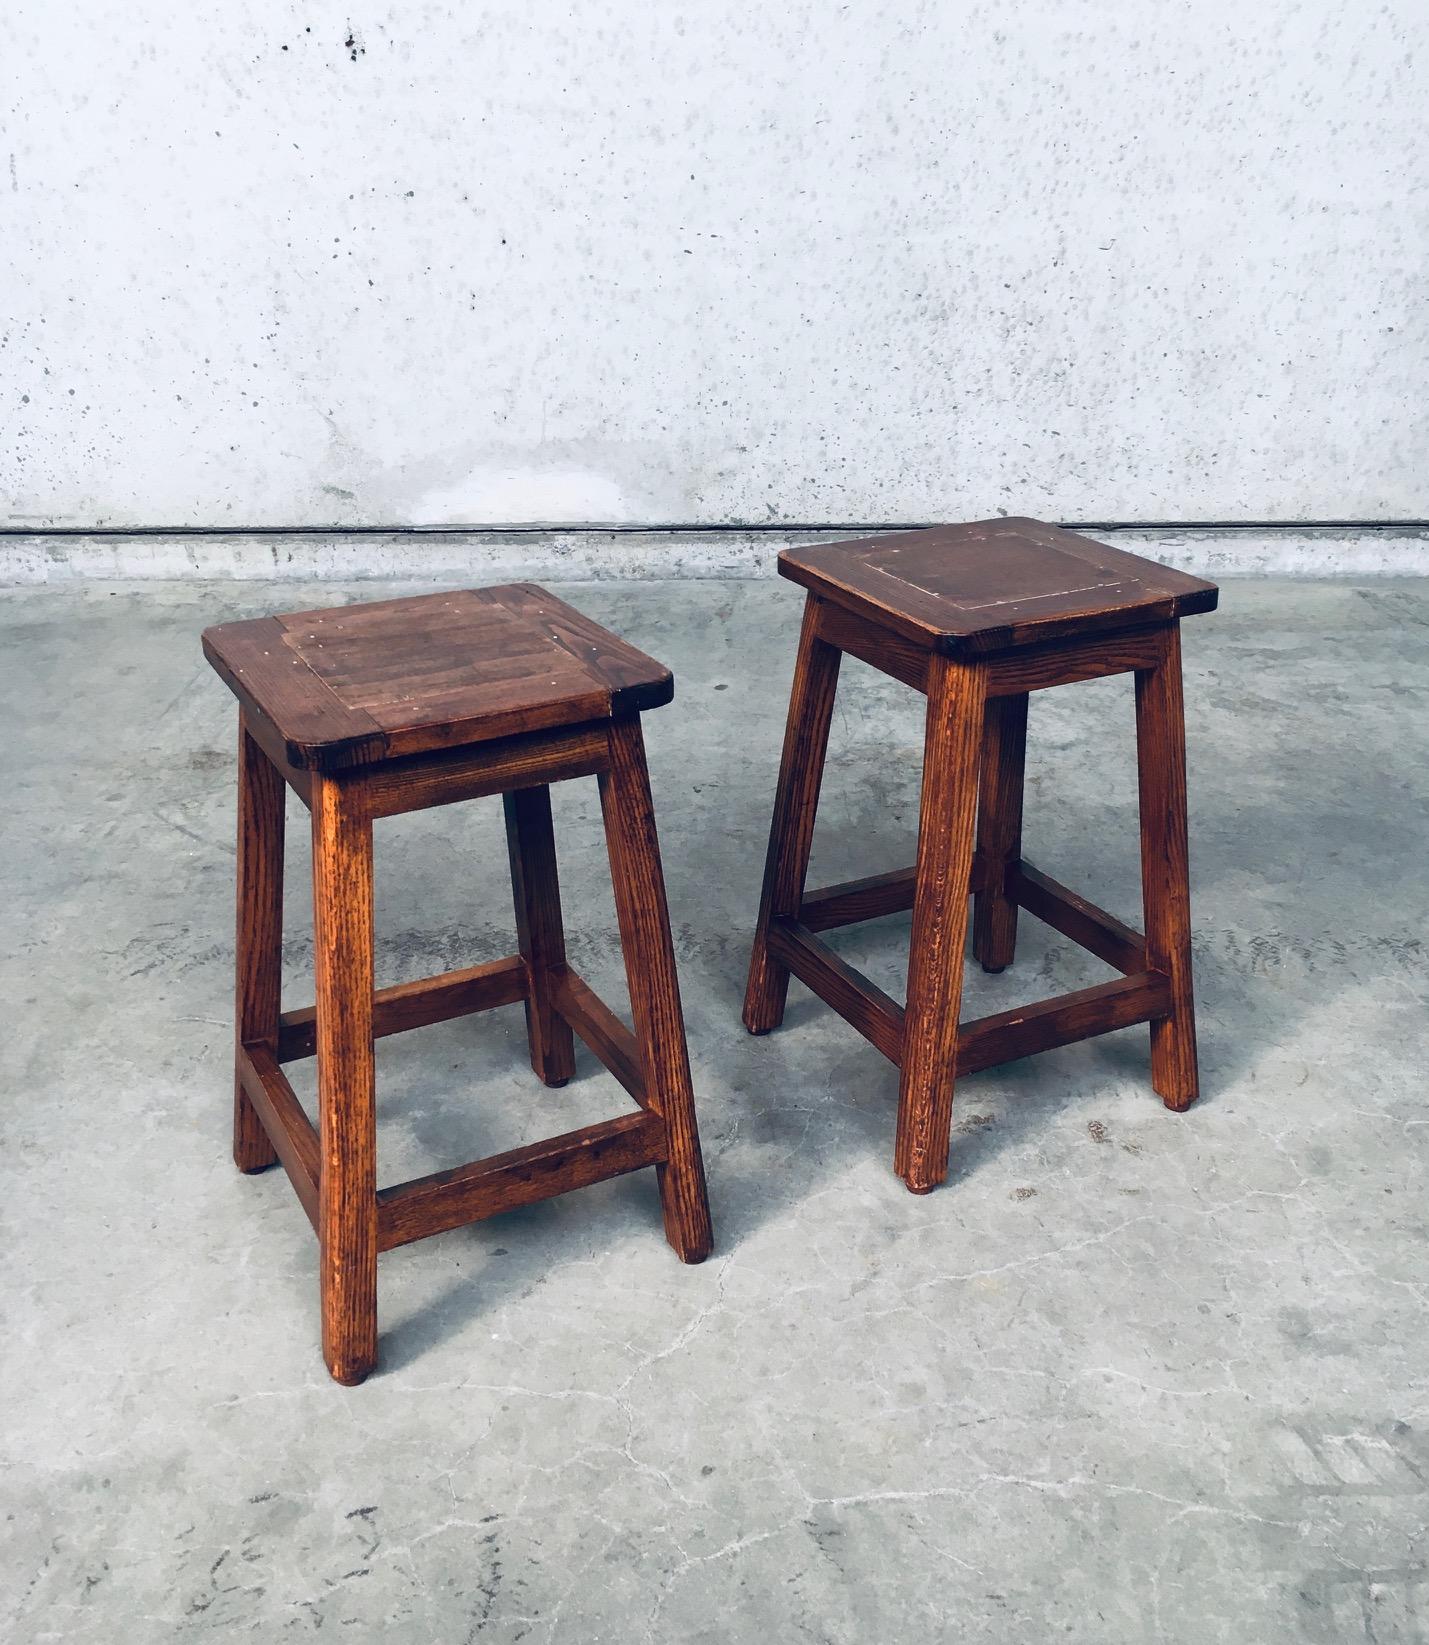 Vintage Square Wooden Potters Stool set of 2. Made in Belgium, 1950's. Solid beech wood constructed stools with original finish. Nice patina with minor wear. Both stools are in very good condition for their age and use. Each measures 53cm x 33cm x